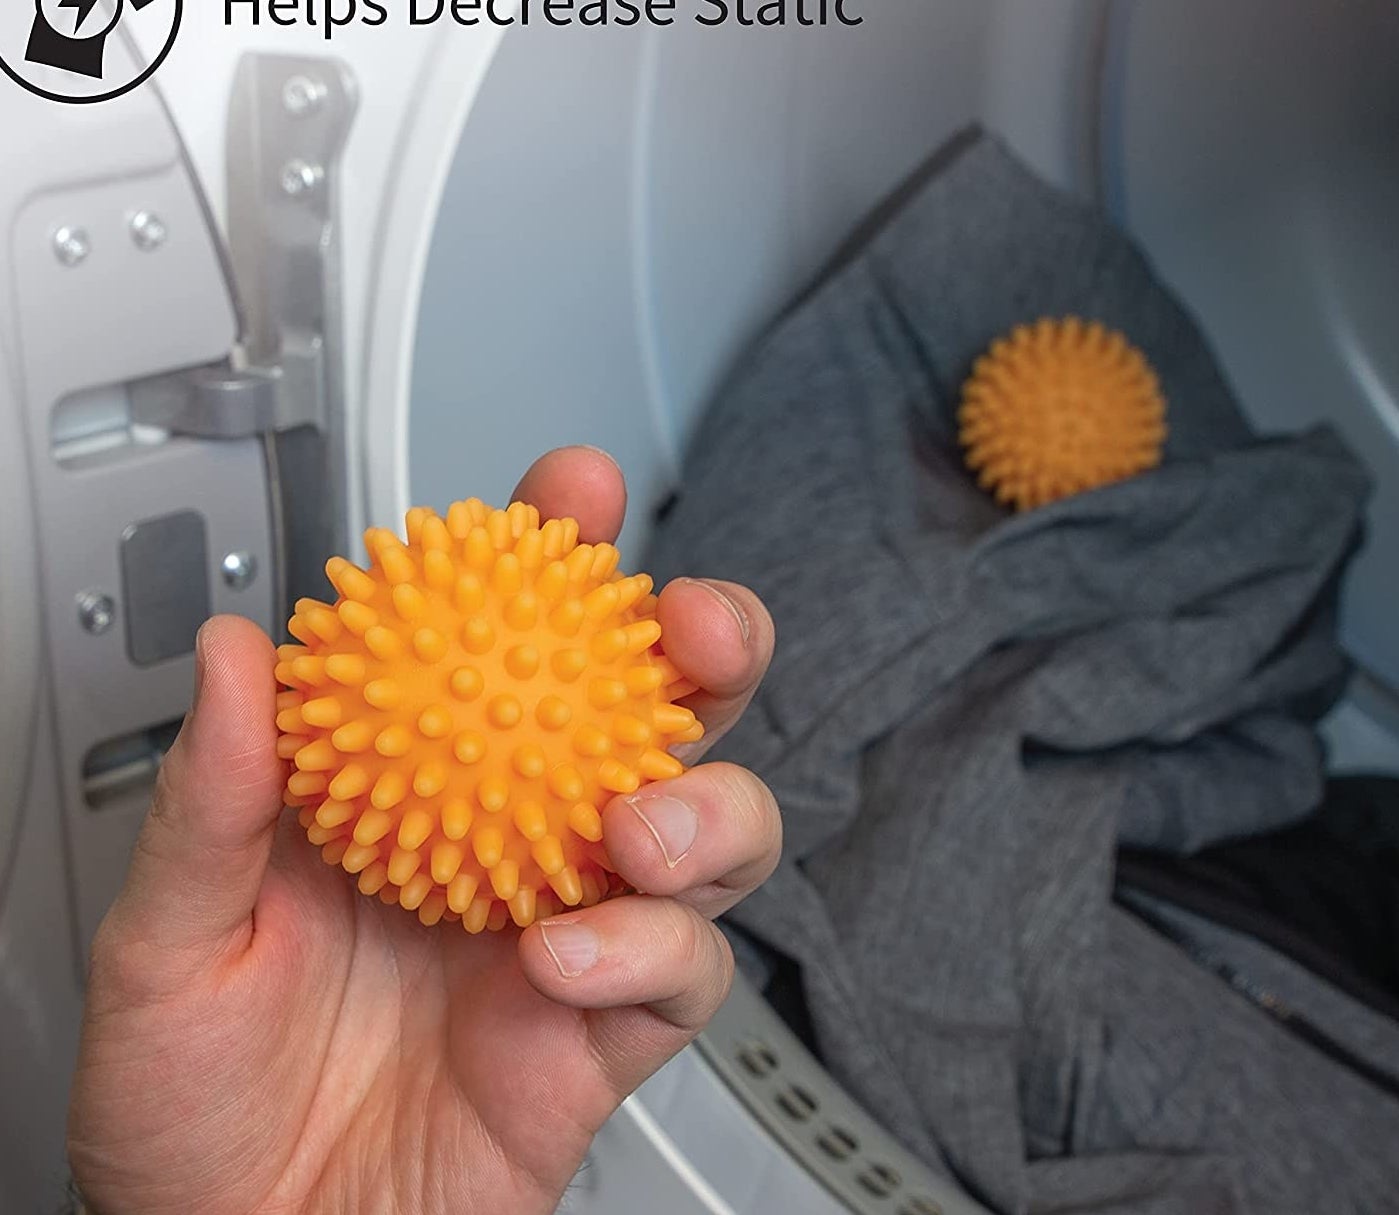 someone holding one of the spiked dryer balls; two others are visible inside